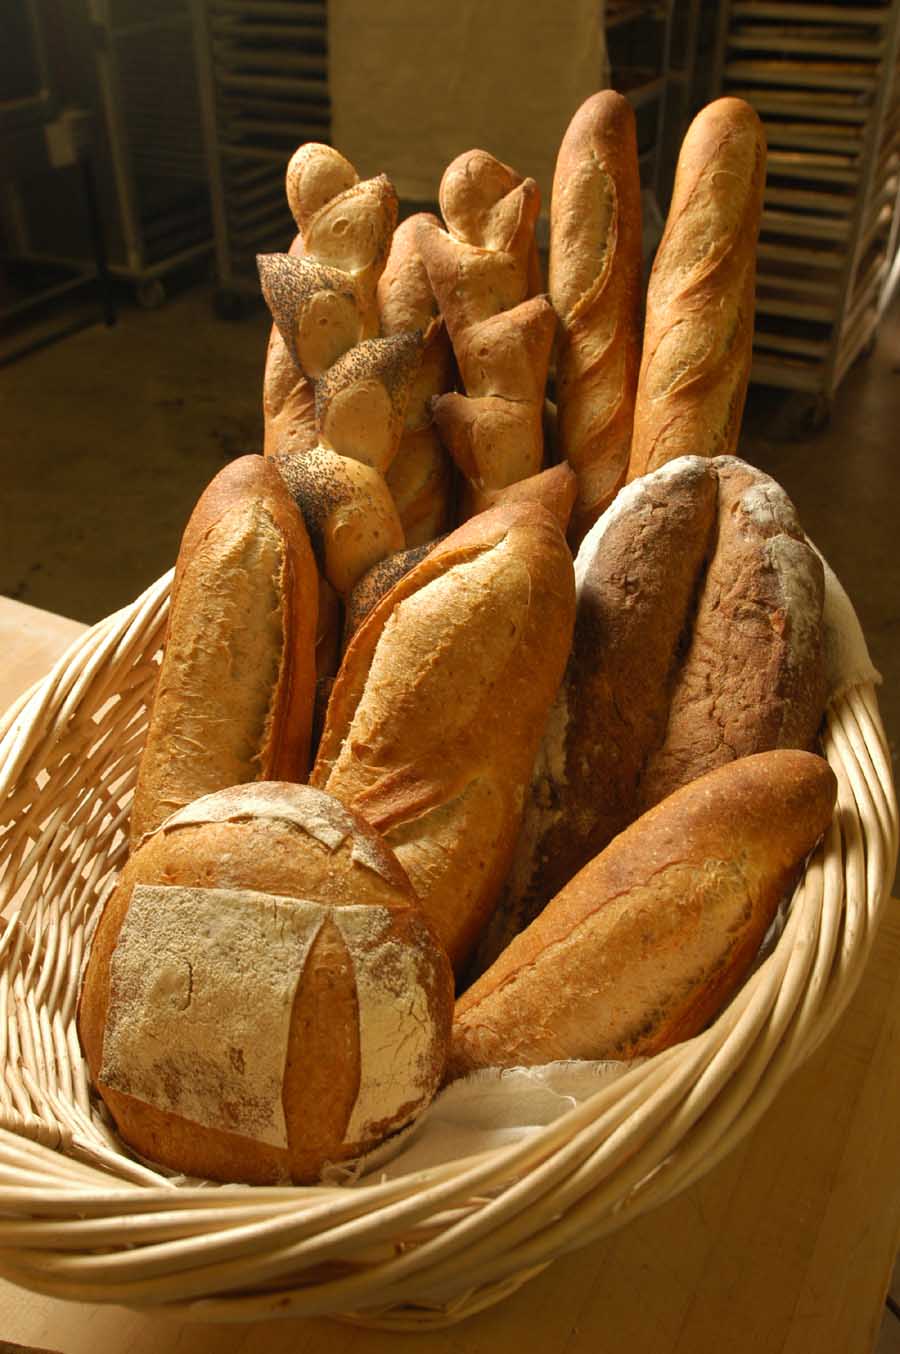 NATURALLY LEAVENED BREADS. 